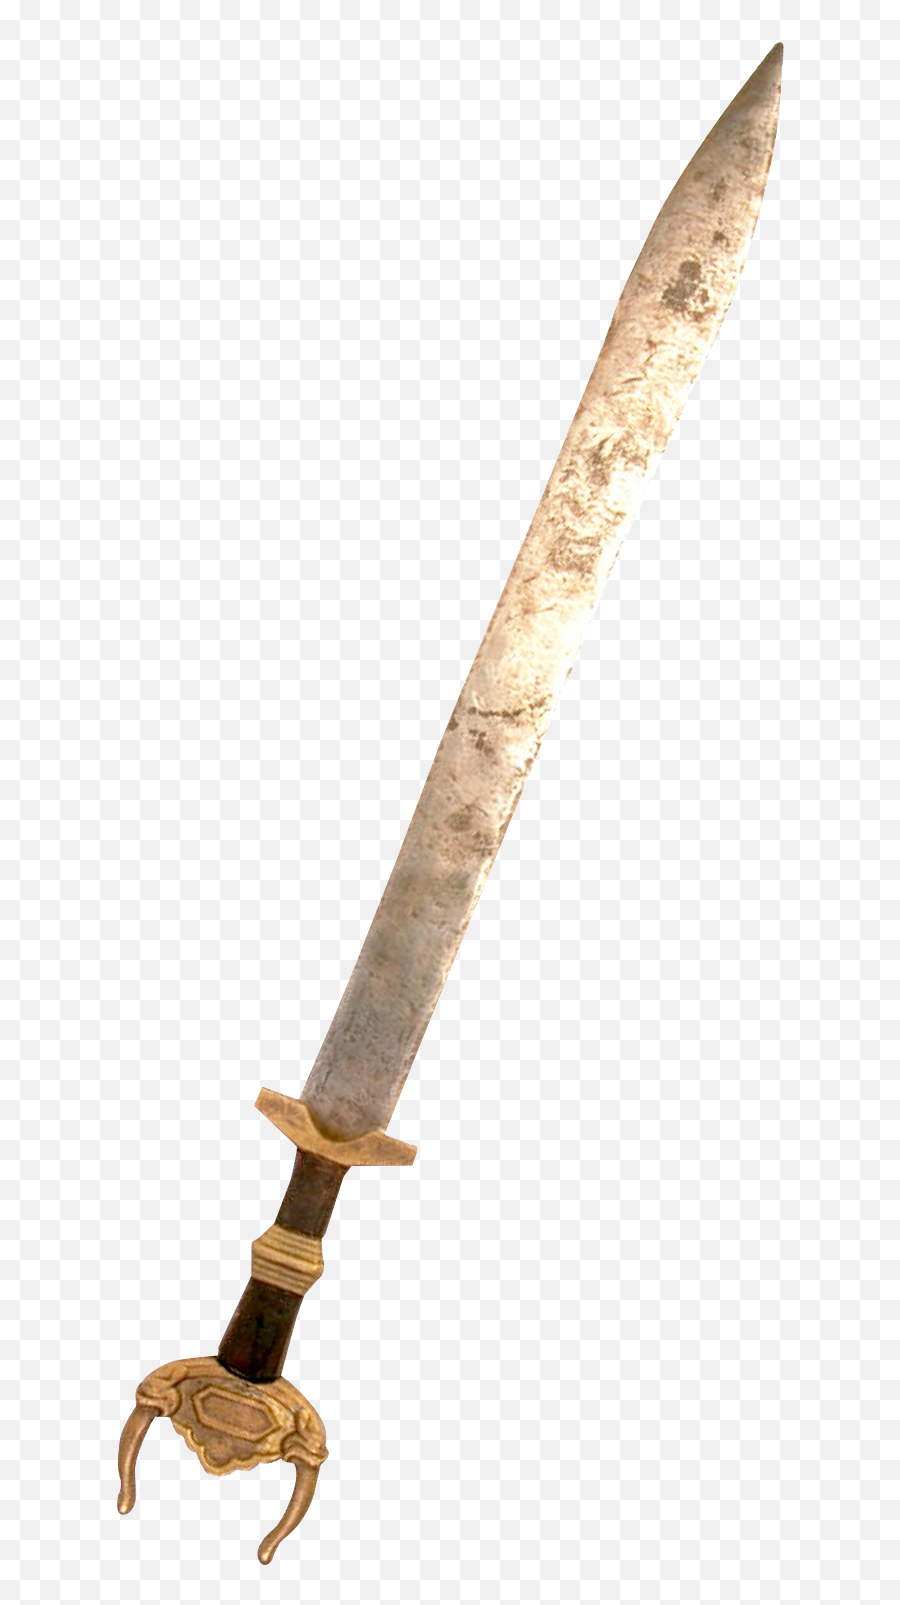 Old Png Images - Pngpix Collectible Sword Emoji,Png Images